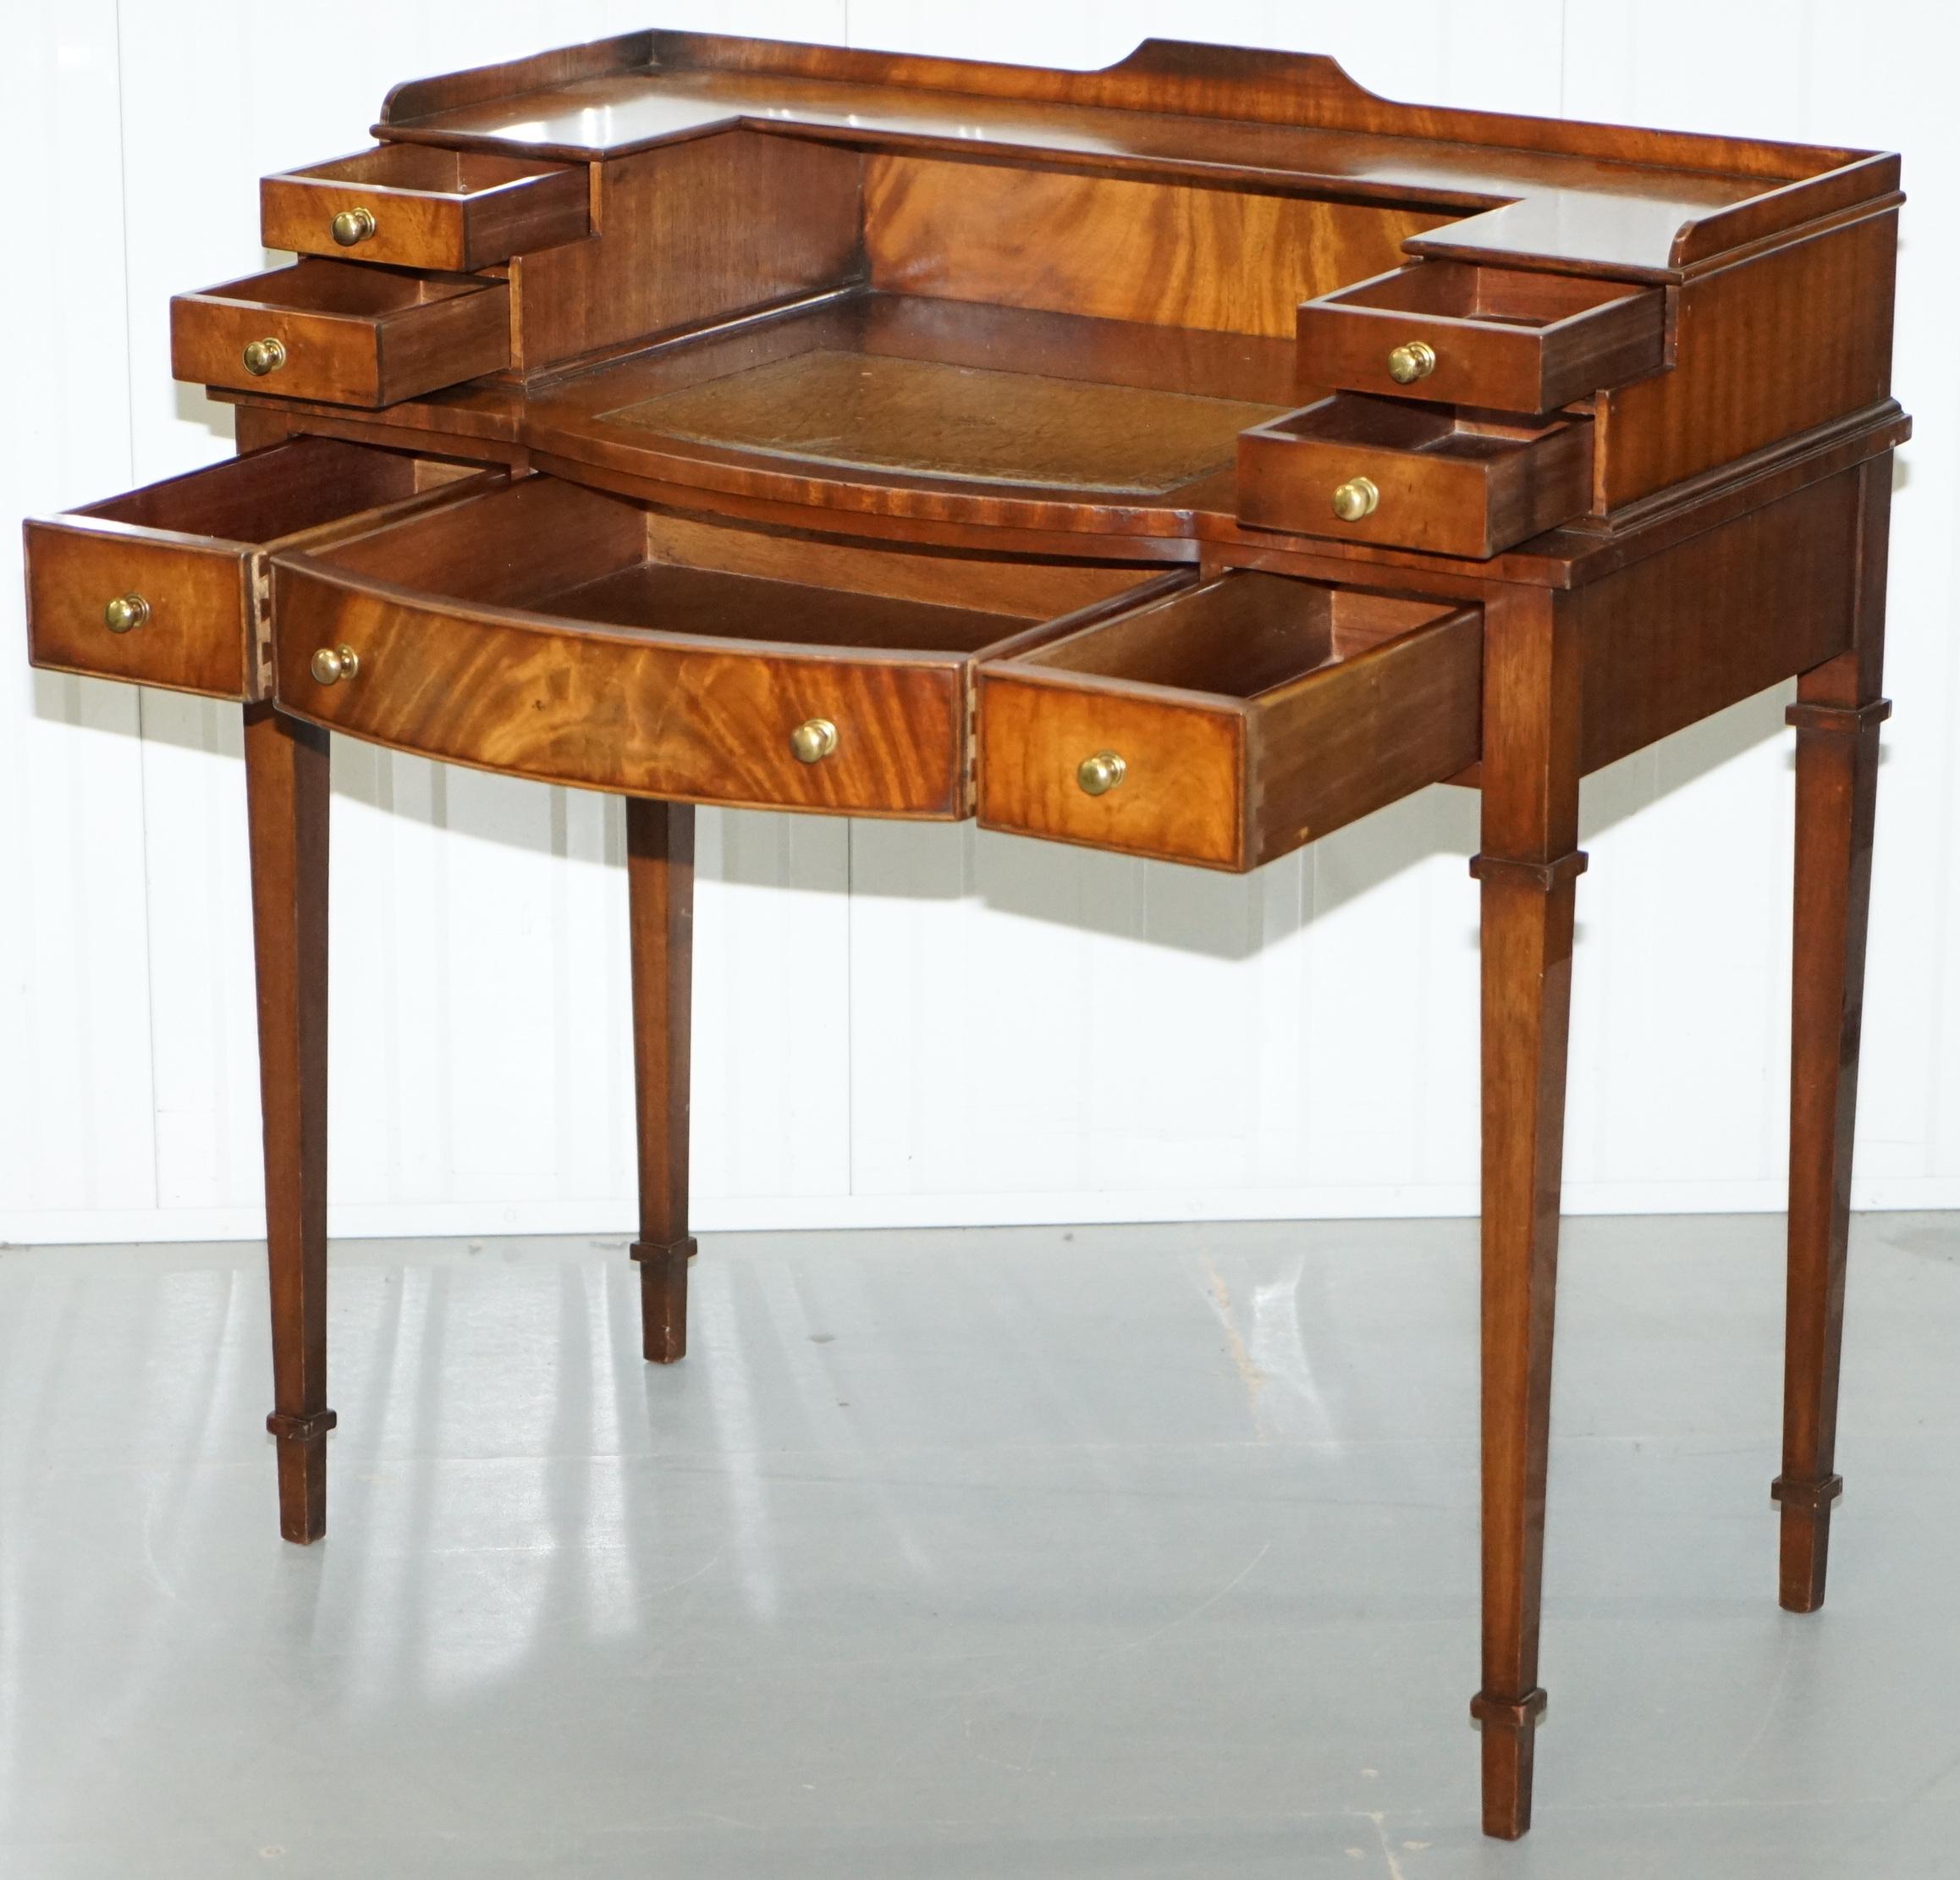 Light Mahogany Bevan Funnell Desk, Leather Writing Surface and Drawers 6